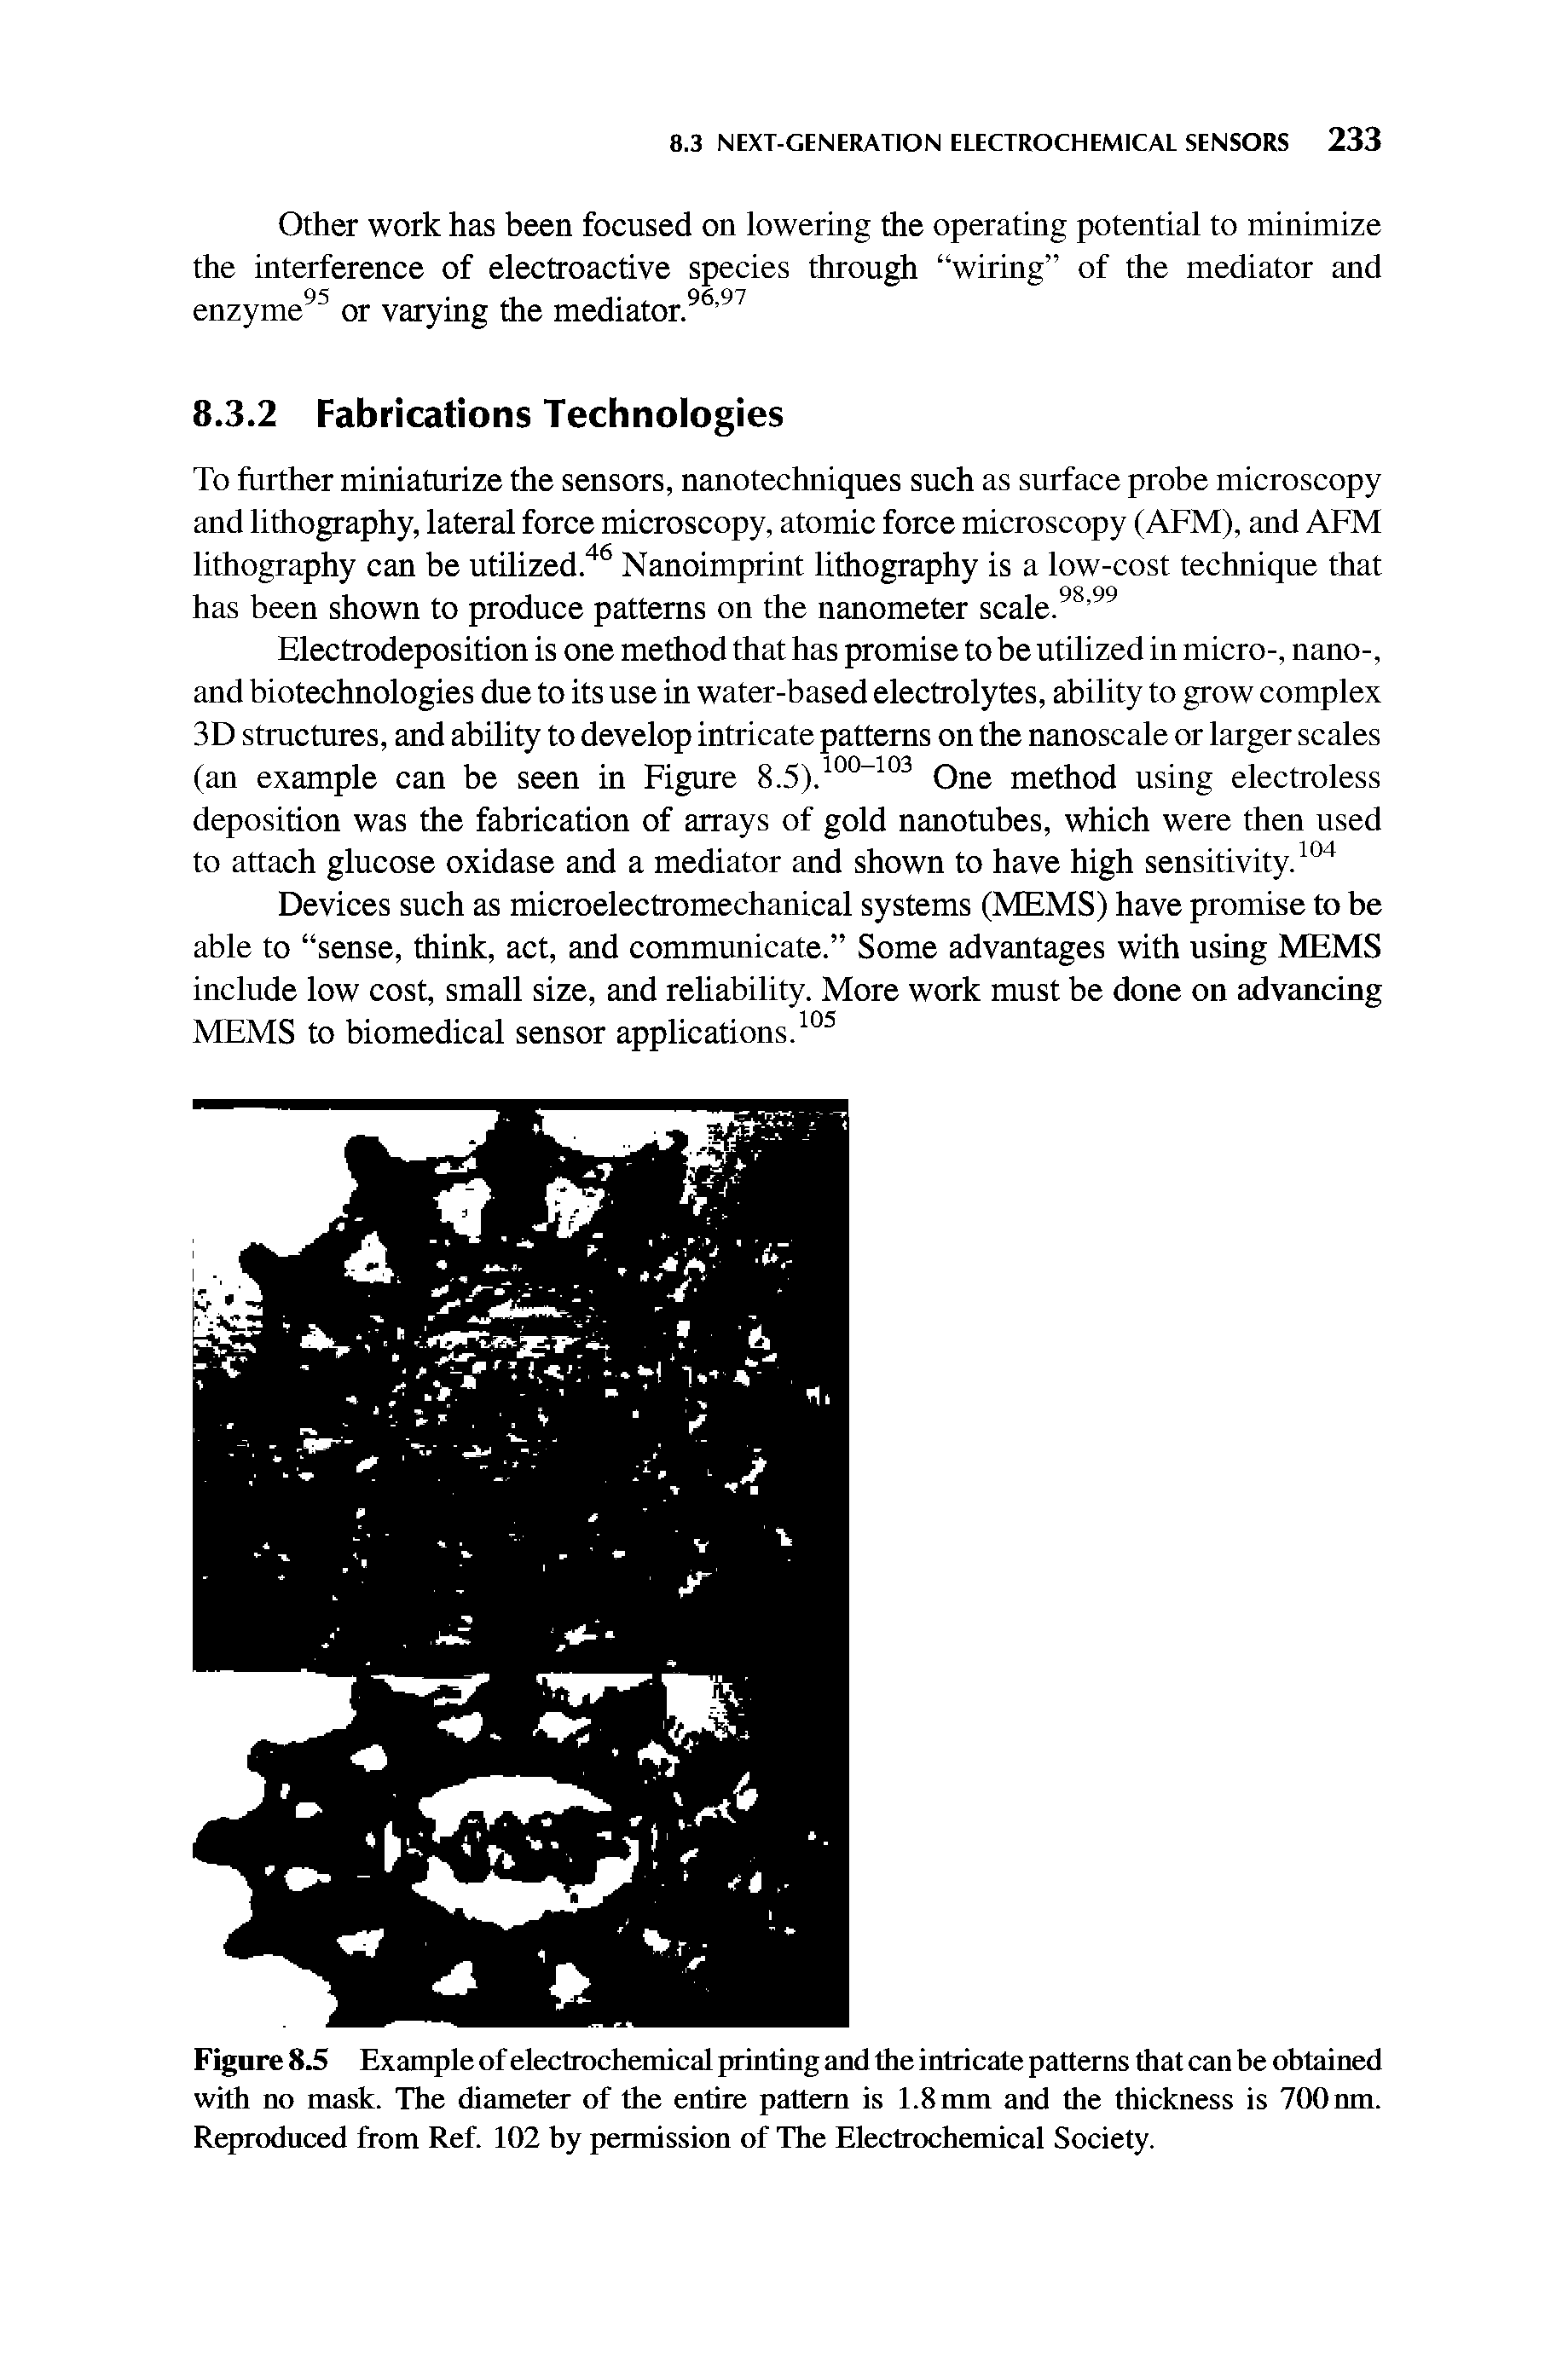 Figure 8.5 Example of electrochemical printing and the intricate patterns that can be obtained with no mask. The diameter of the entire pattern is 1.8 mm and the thickness is 700 nm. Reproduced from Ref. 102 by permission of The Electrochemical Society.